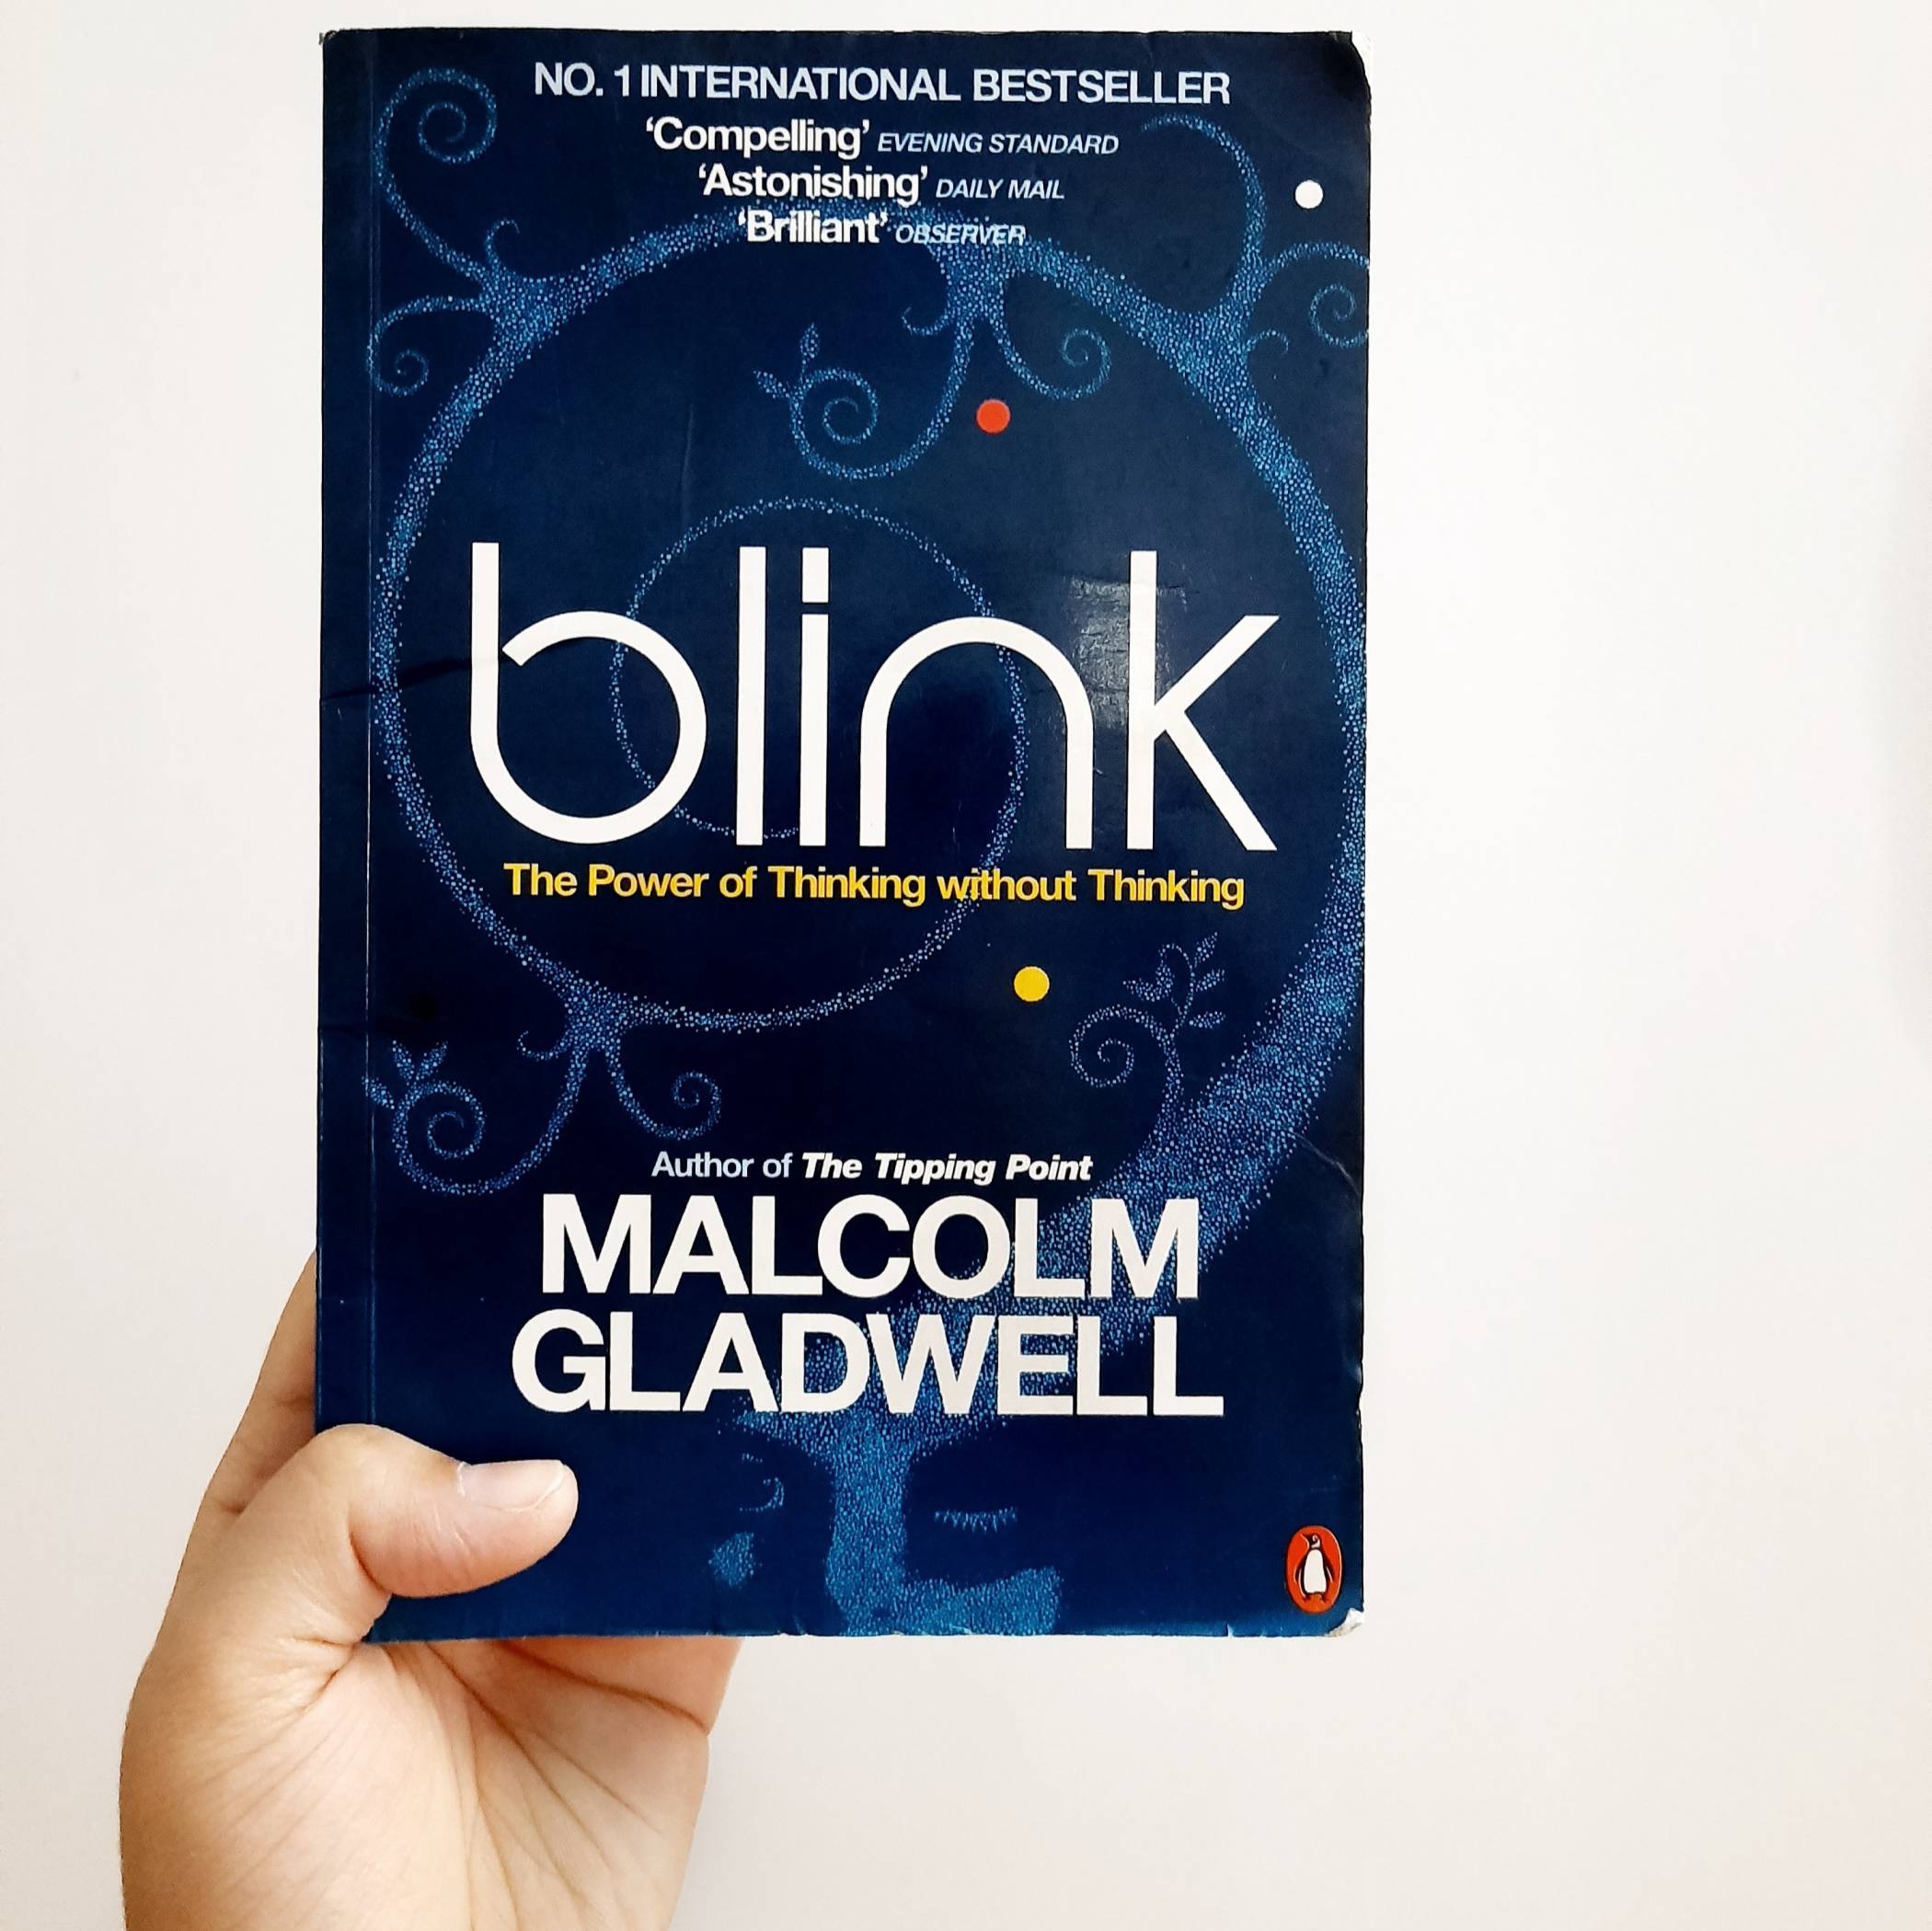 blink by malcolm gladwell